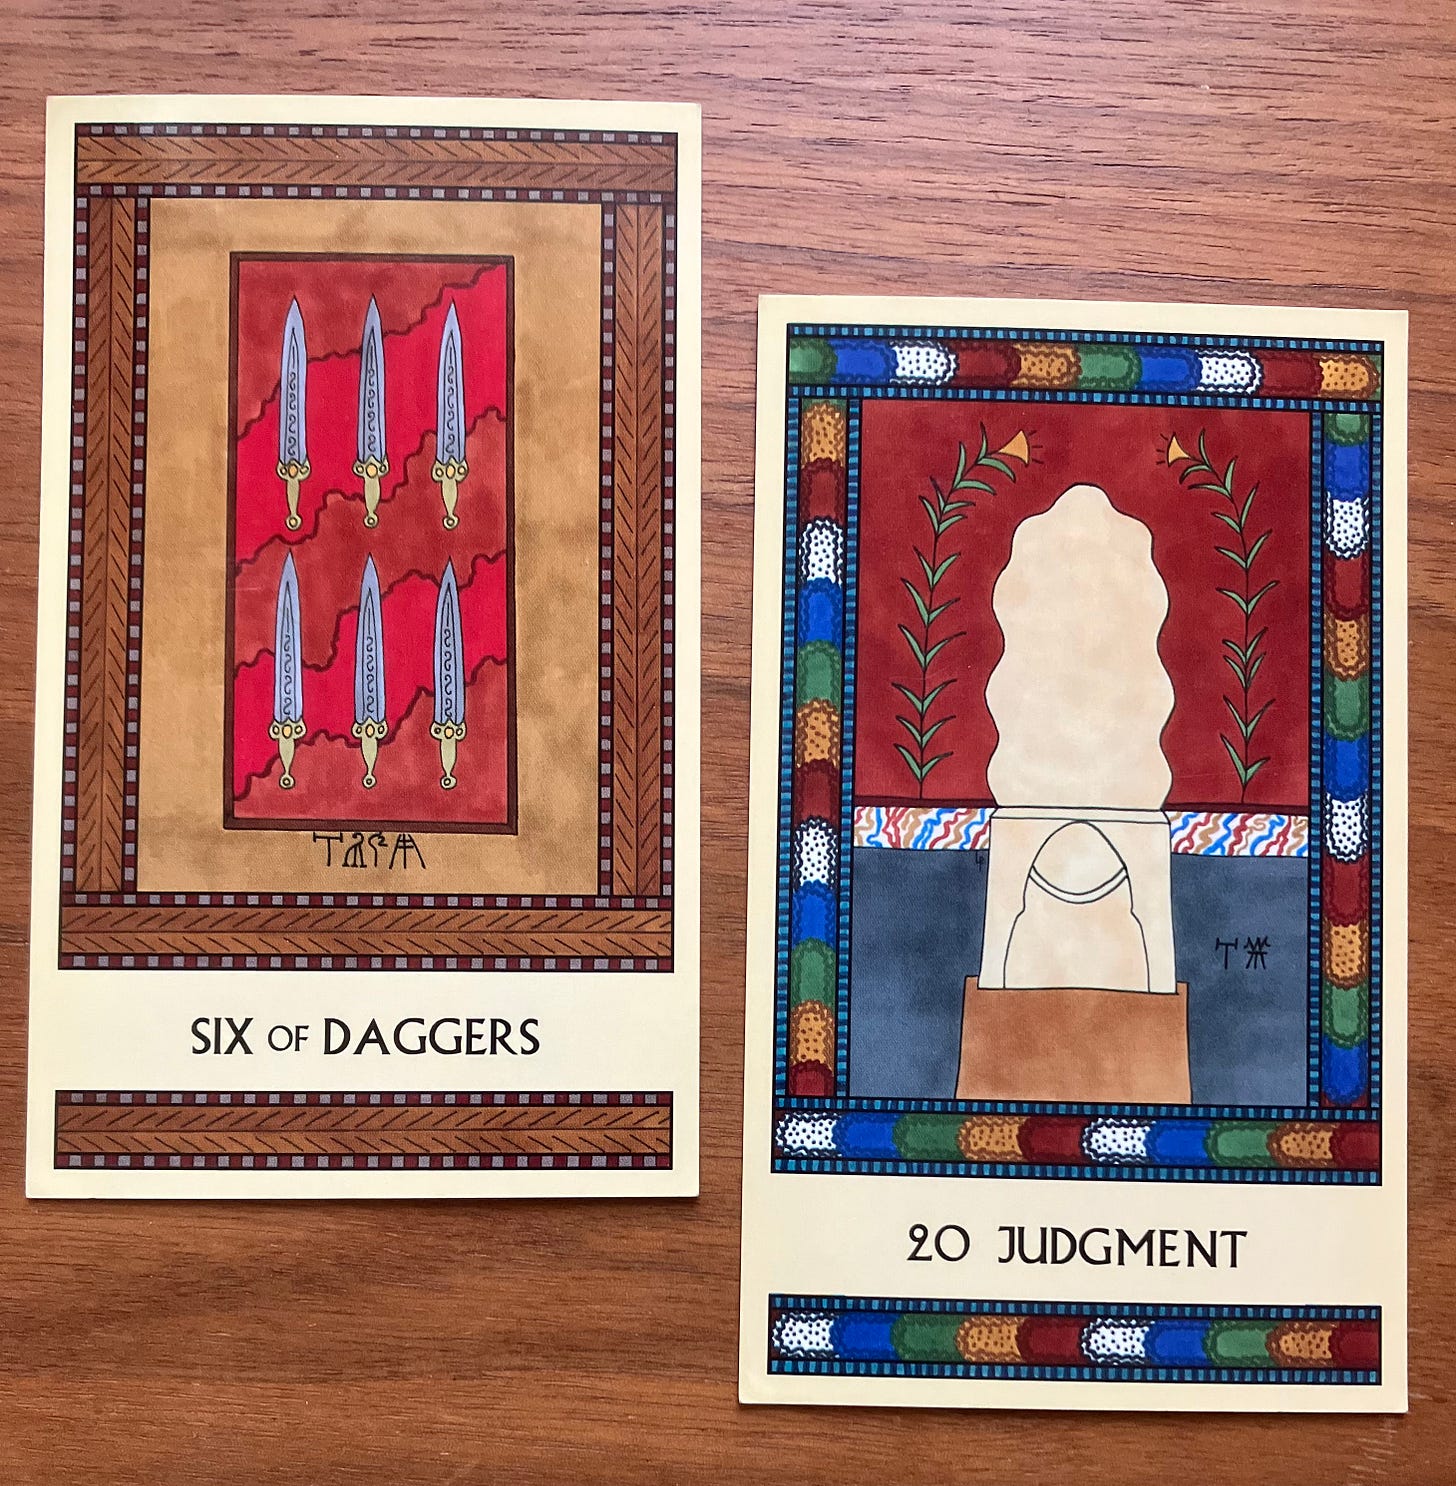 Two Minoan Tarot cards on a brown wood surface. The Six of Daggers is in shades of tan, brown, and red. It shows six fancy daggers lying in a decorative presentation box. Judgment has a multicolored border. It shows the central seat in the Knossos Throne Room, surrounded by painted walls.